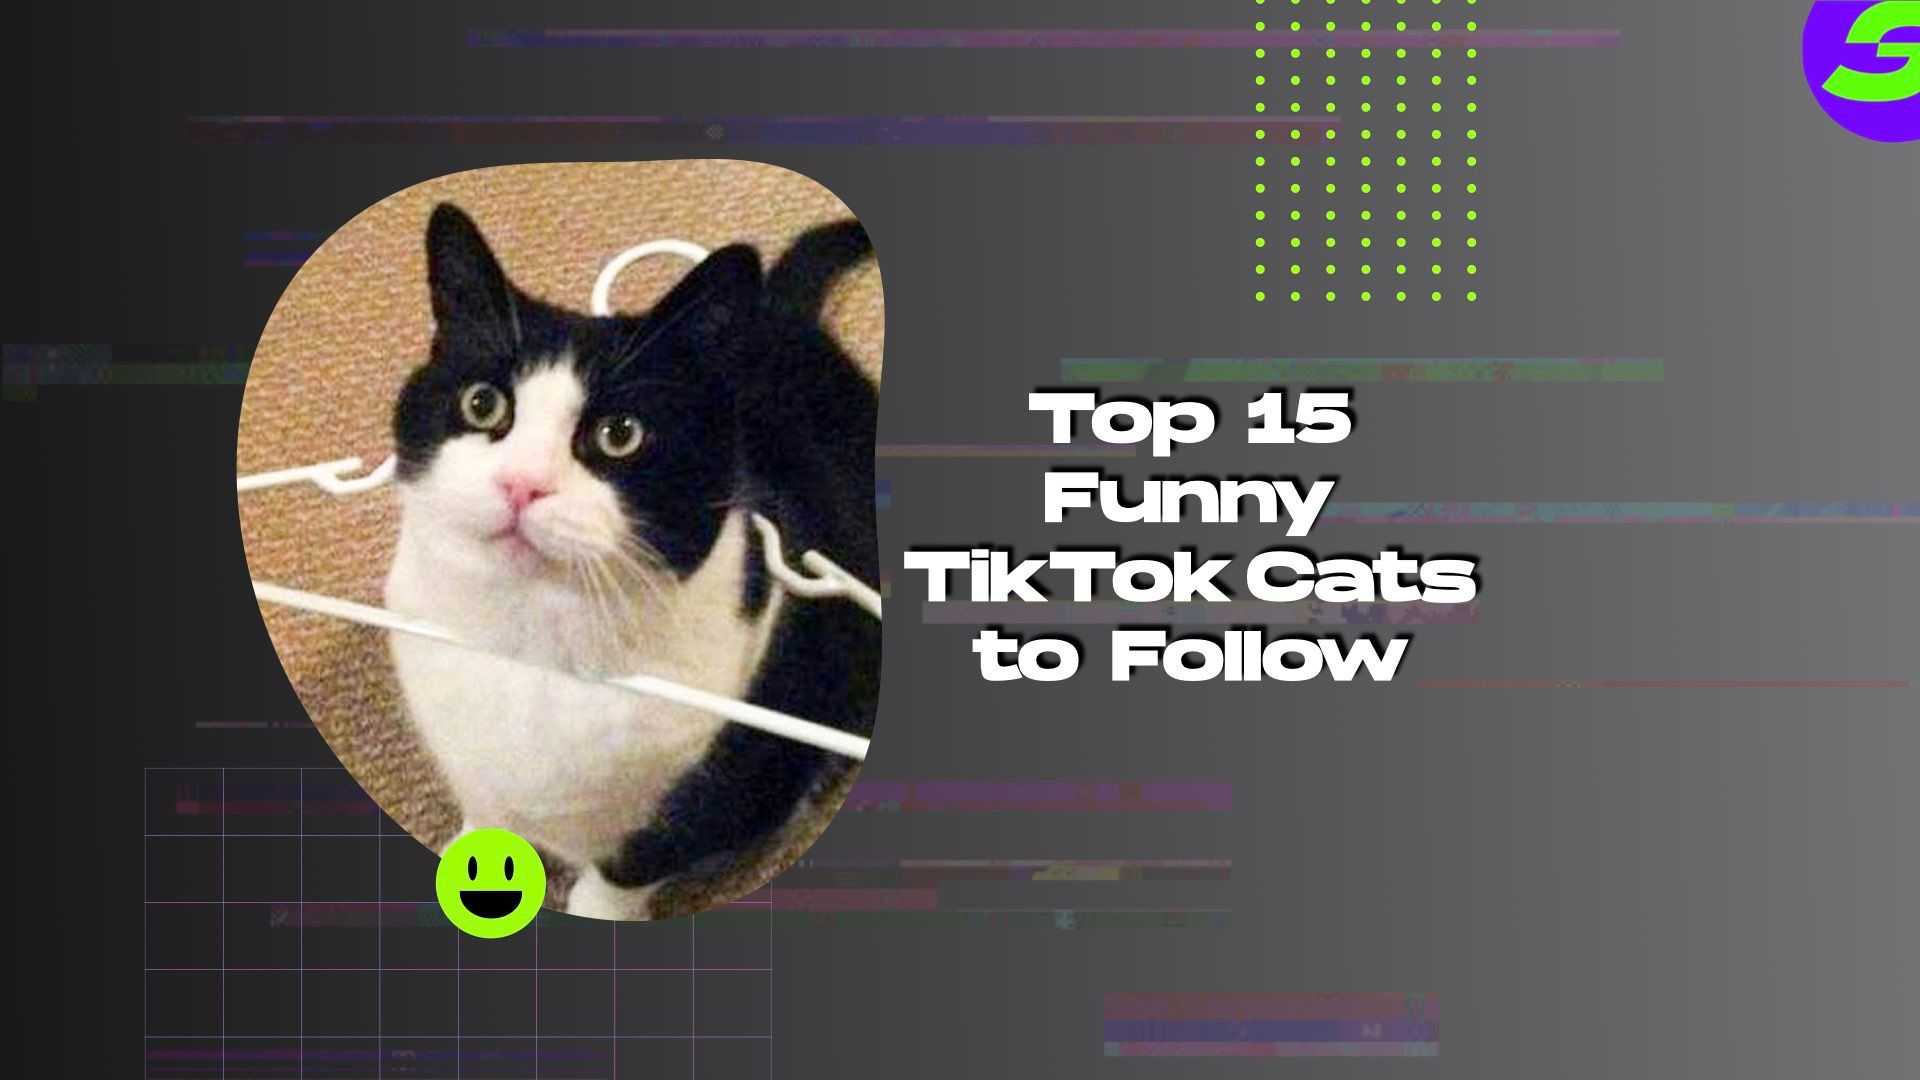 shotcut free video editor android Top 15 Funny TikTok Cats